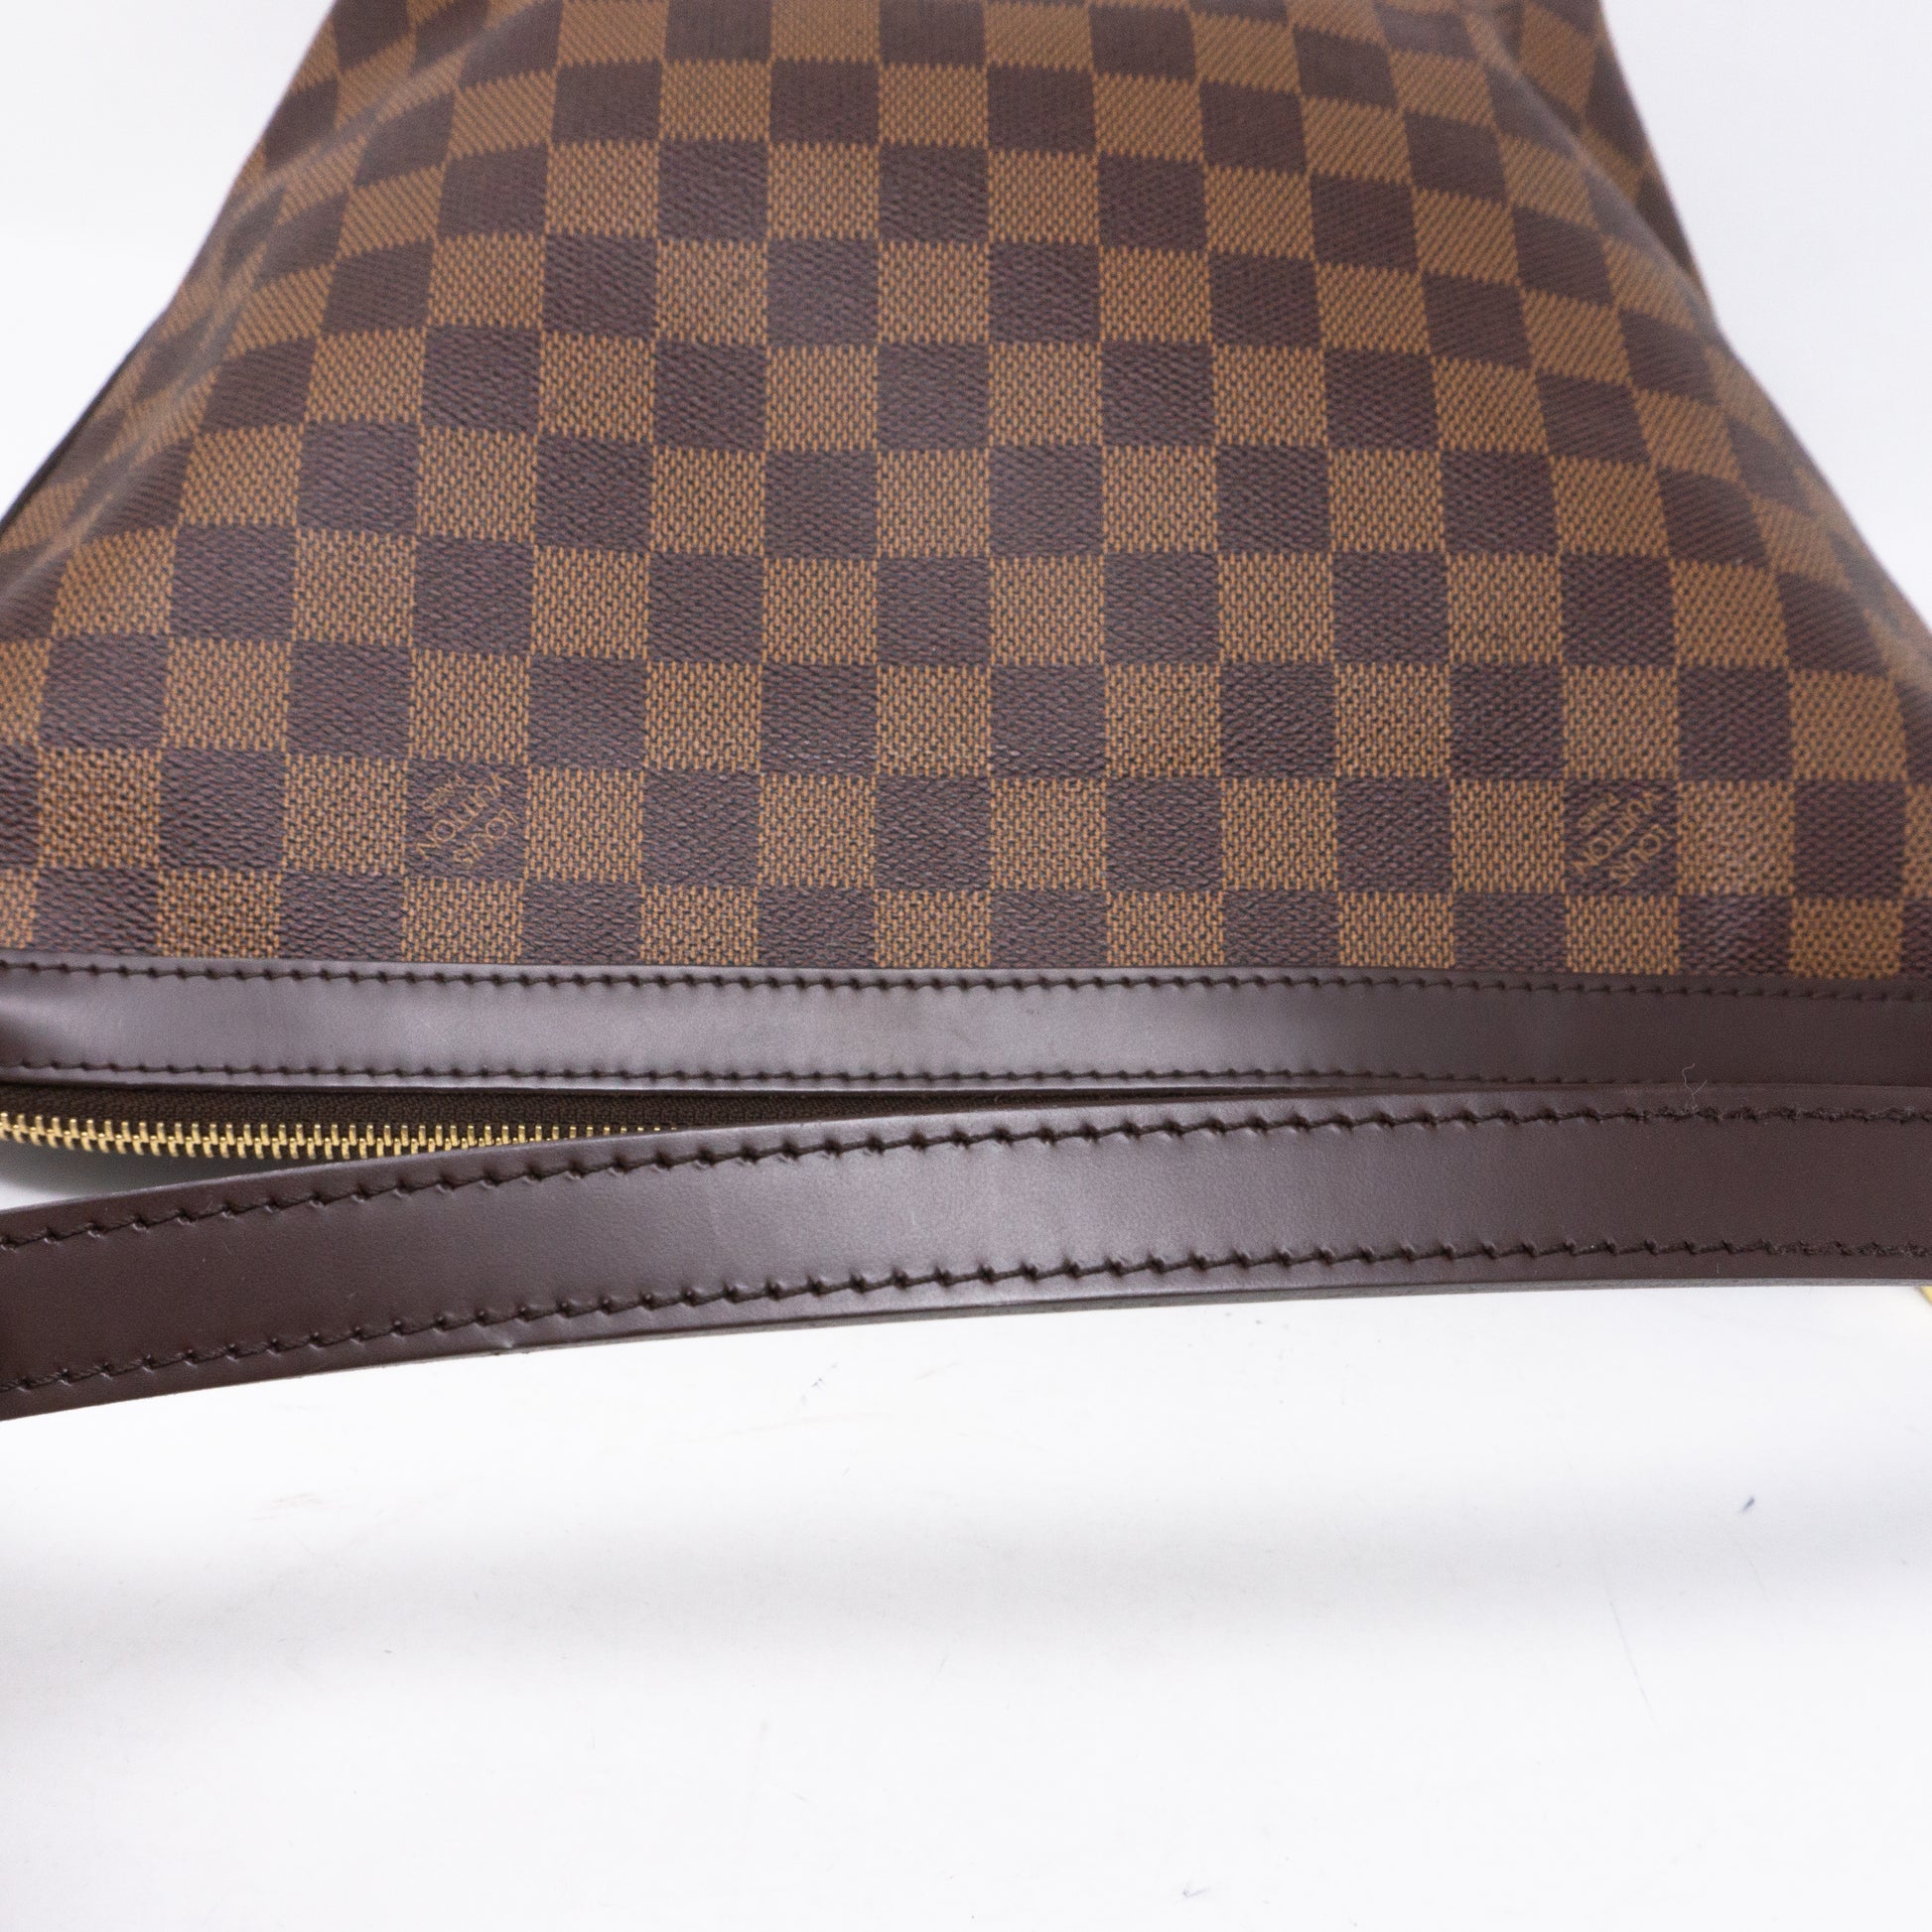 Authentic Louis Vuitton “duomo” in damier ebene! immaculate shape